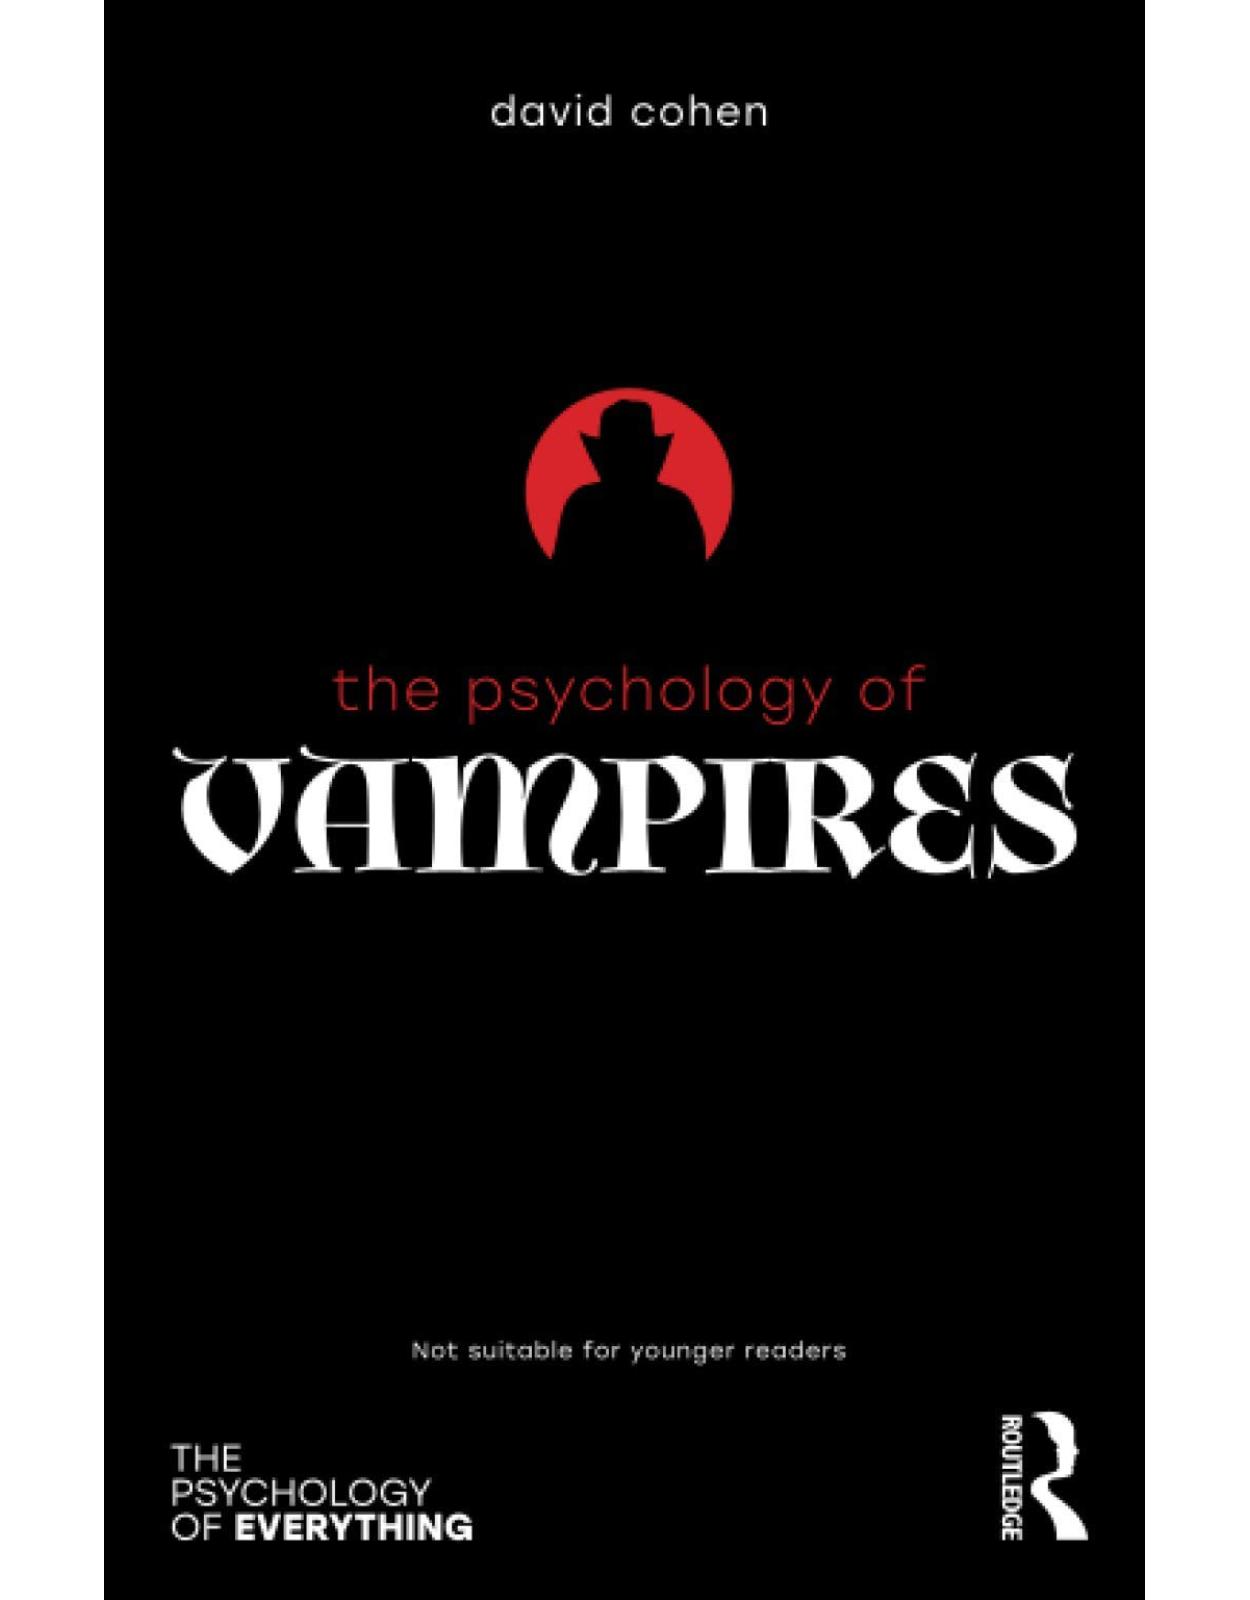 The Psychology of Vampires (The Psychology of Everything)